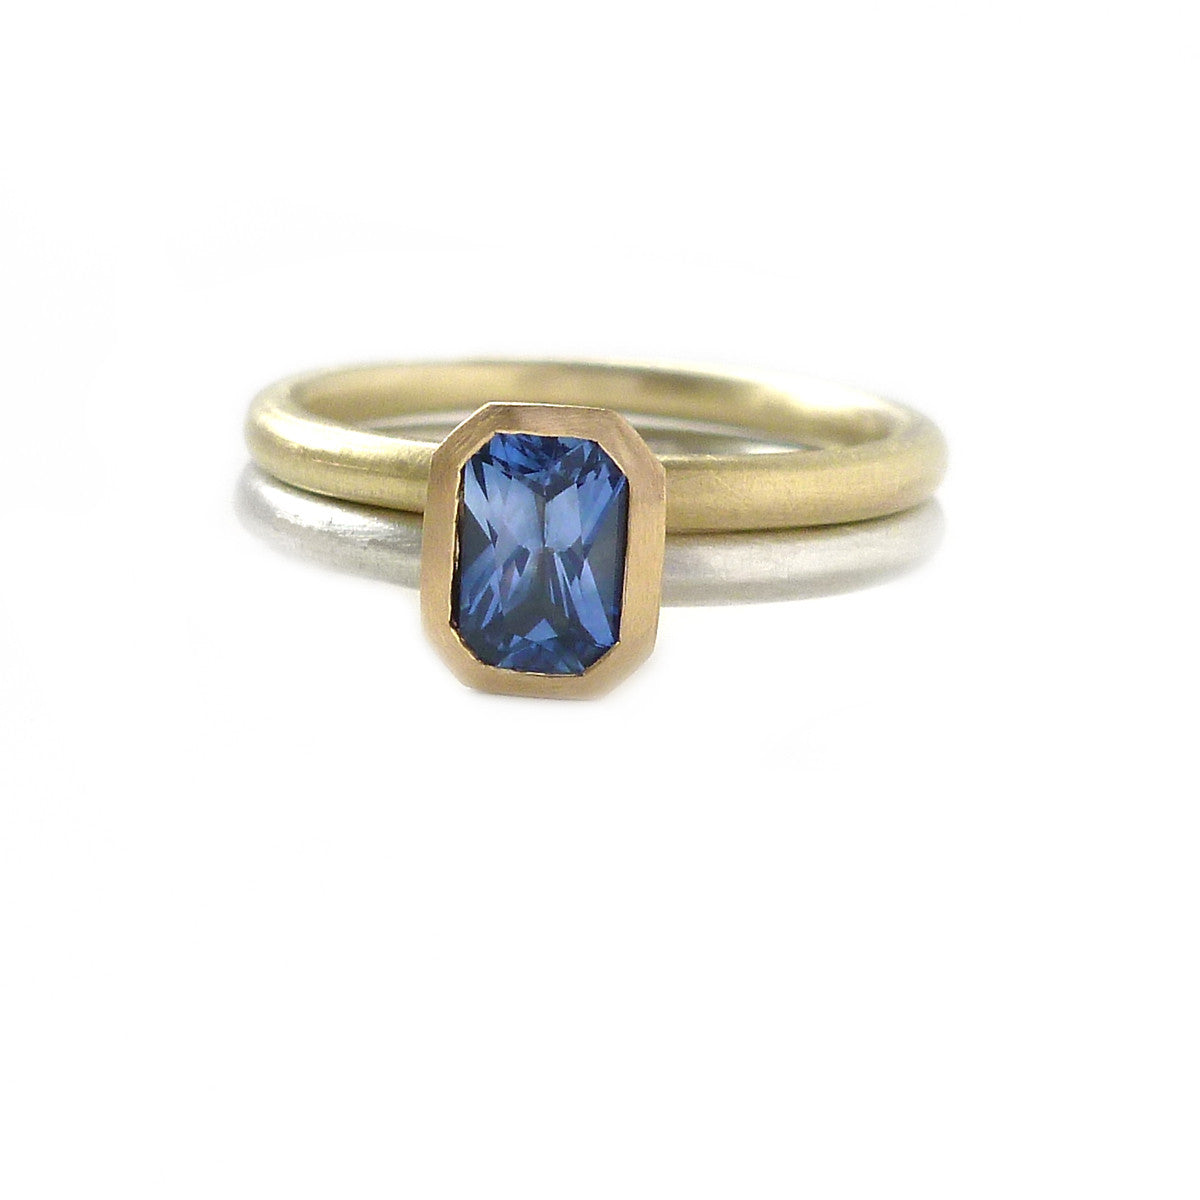 SOLD: 18k Gold and Sapphire Ring (OF13) - Sue Lane Contemporary Jewellery - 3